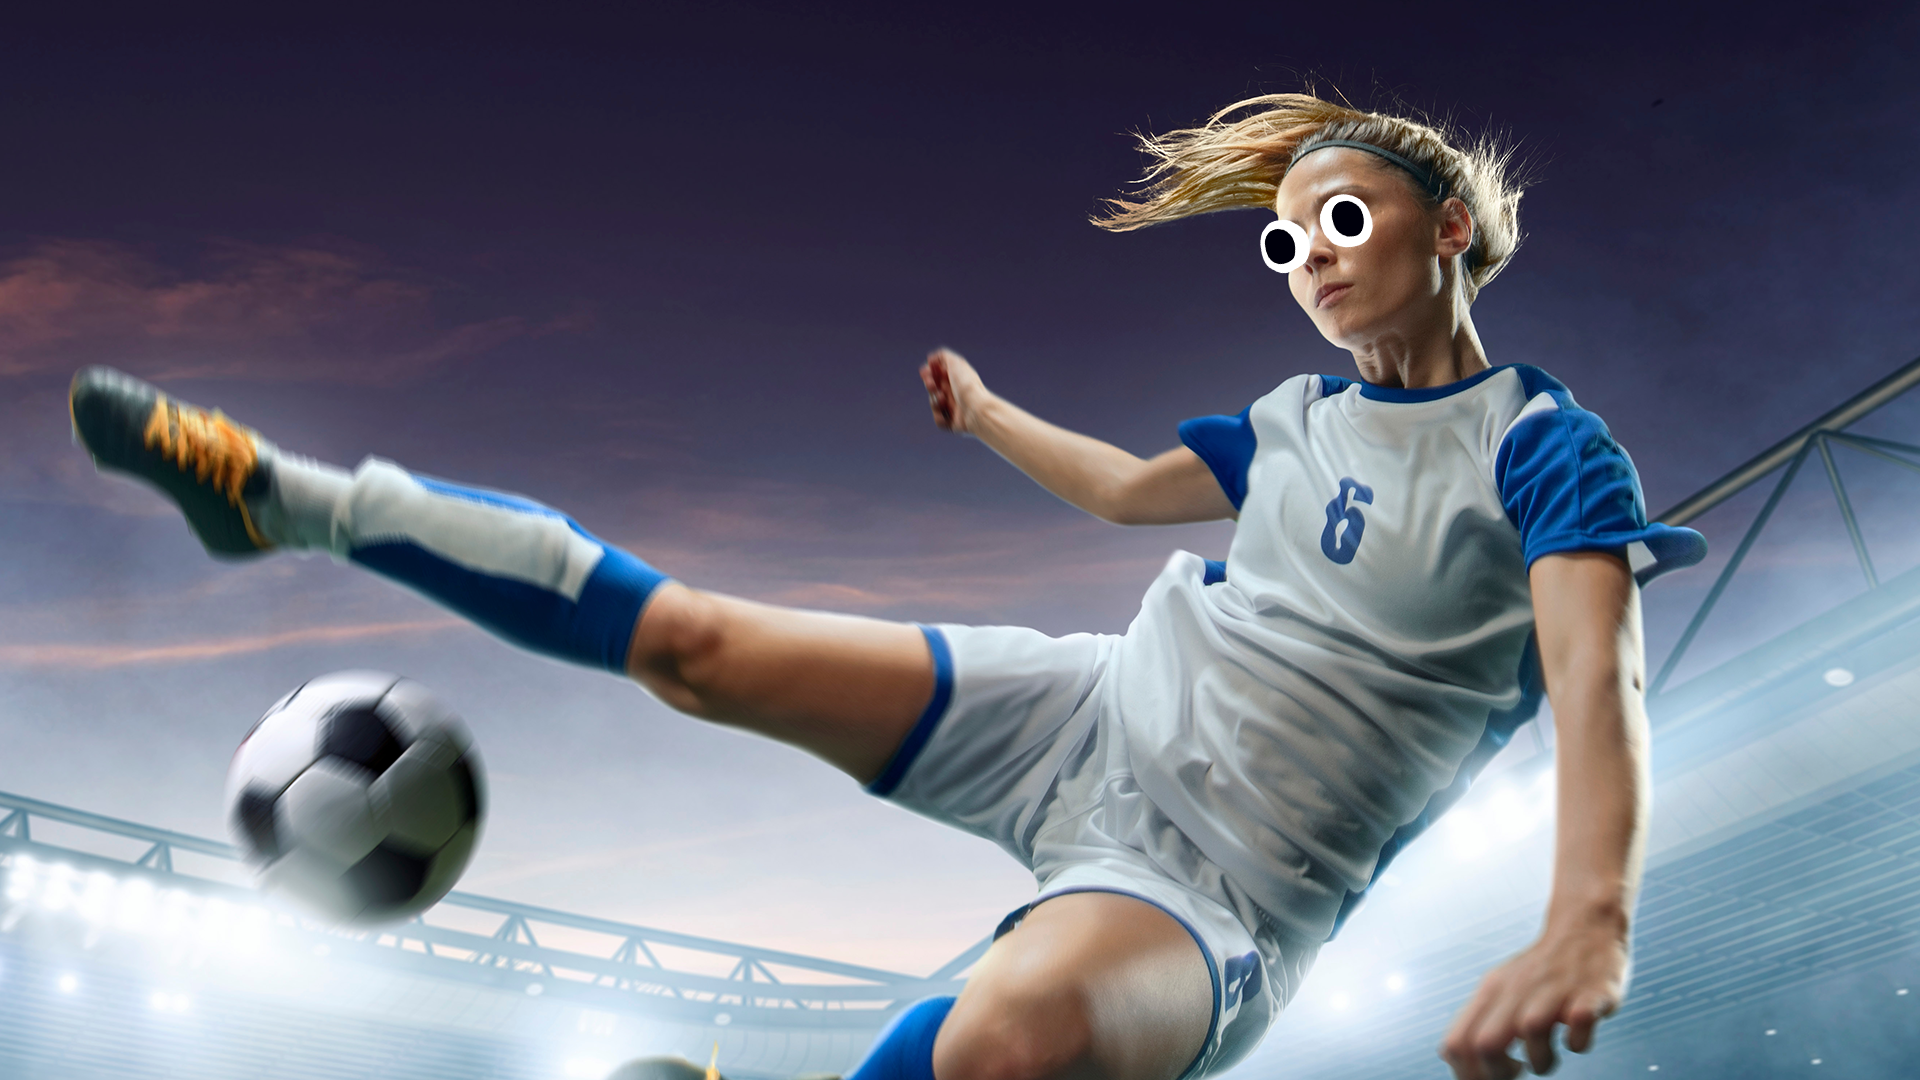 Cool looking female footballer kicking the ball